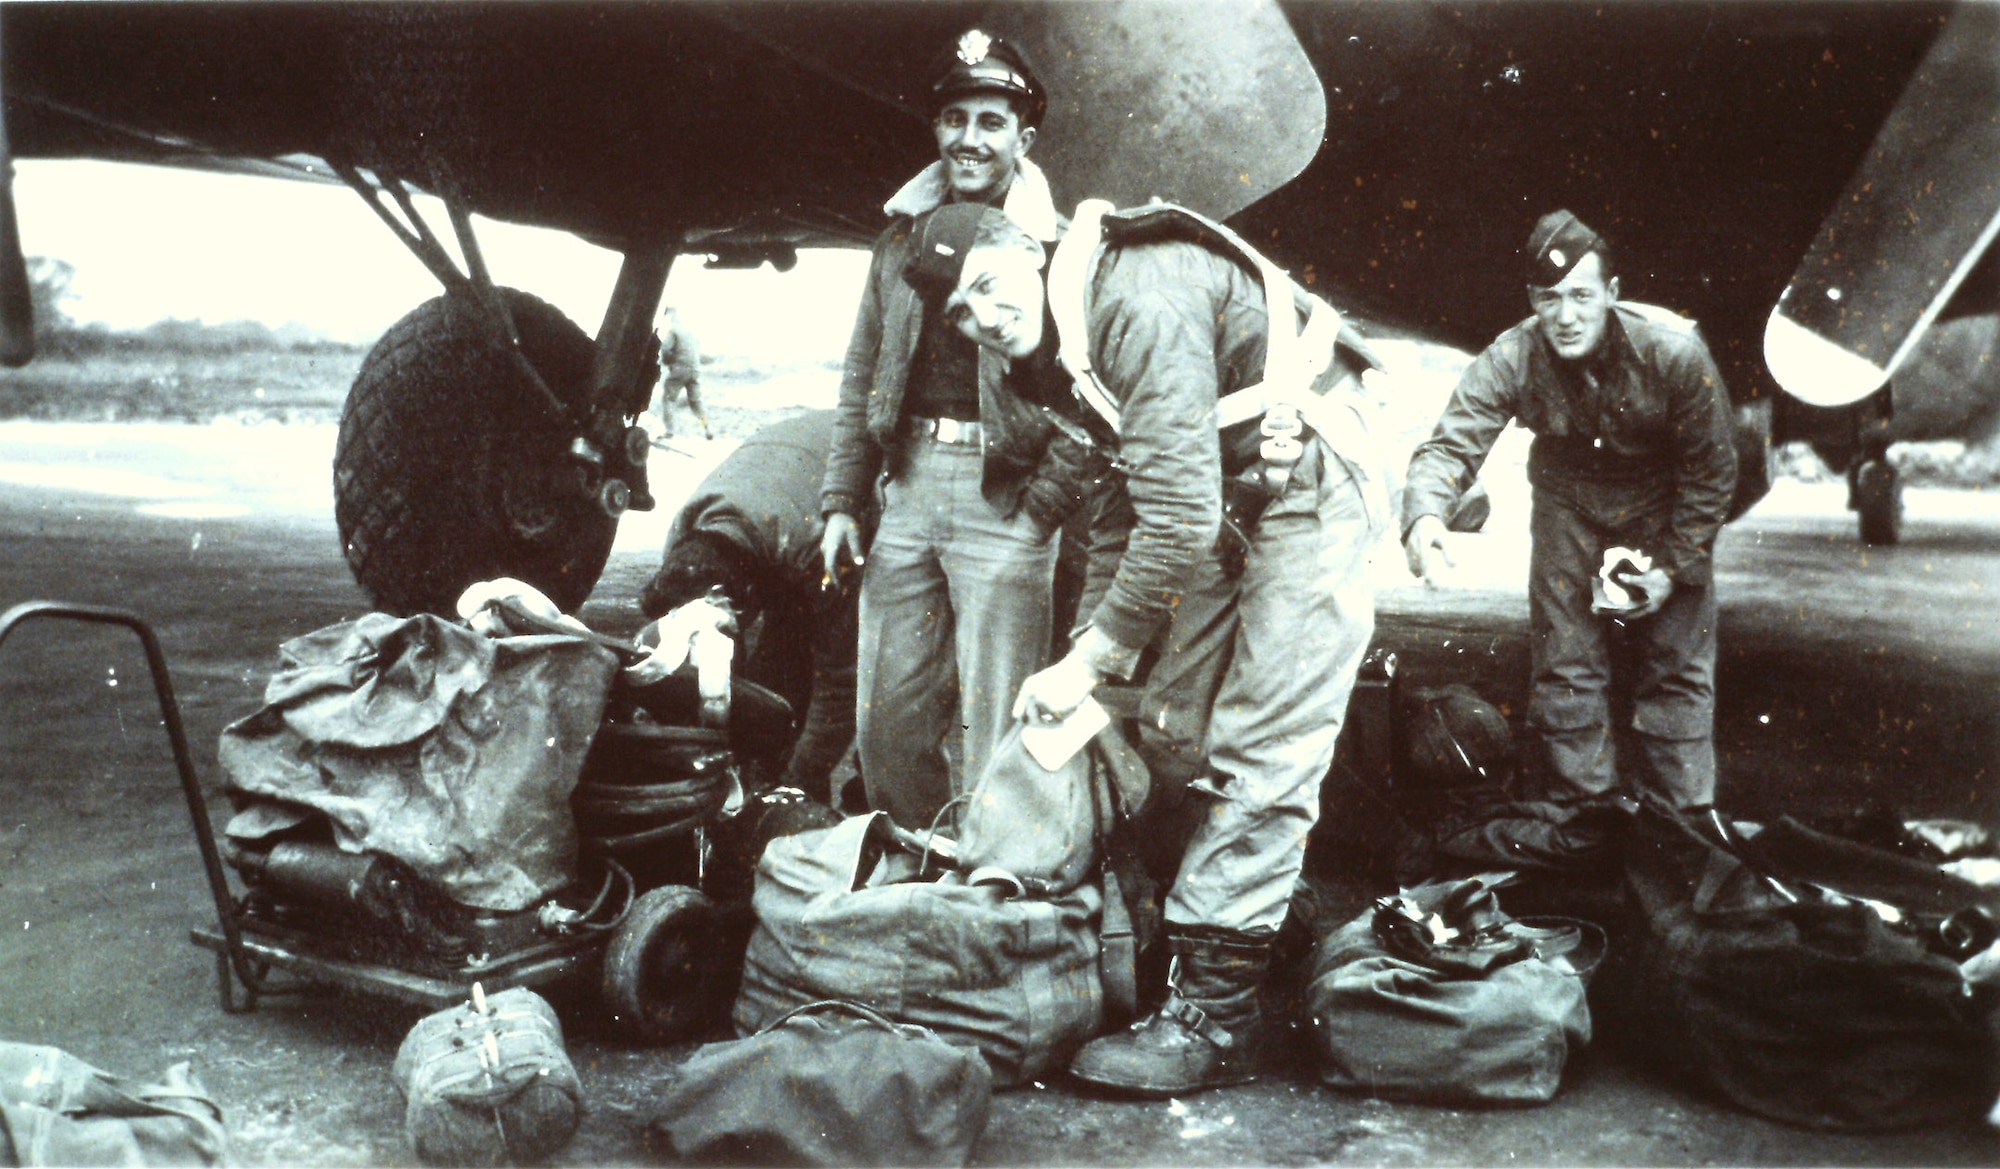 U.S. Army Air Force 2nd Lt. Alvin H. Belimow, left, bombardier; 2nd Lt. John A. Clark, center, pilot, and 1st Lt. Charles B. Blanding, pilot, all 100th Bomb Group, sort through their bags after flying a mission to Cologne, Germany, in their B-17 Flying Fortress aircraft at Thorpe Abbotts, England, Oct. 17, 1944. Clark, now 98, attended the 100th Bomb Group reunion in Dallas, Texas, October 2021, and shared memories and stories of his time serving in the military. (Courtesy photo from Clark family)